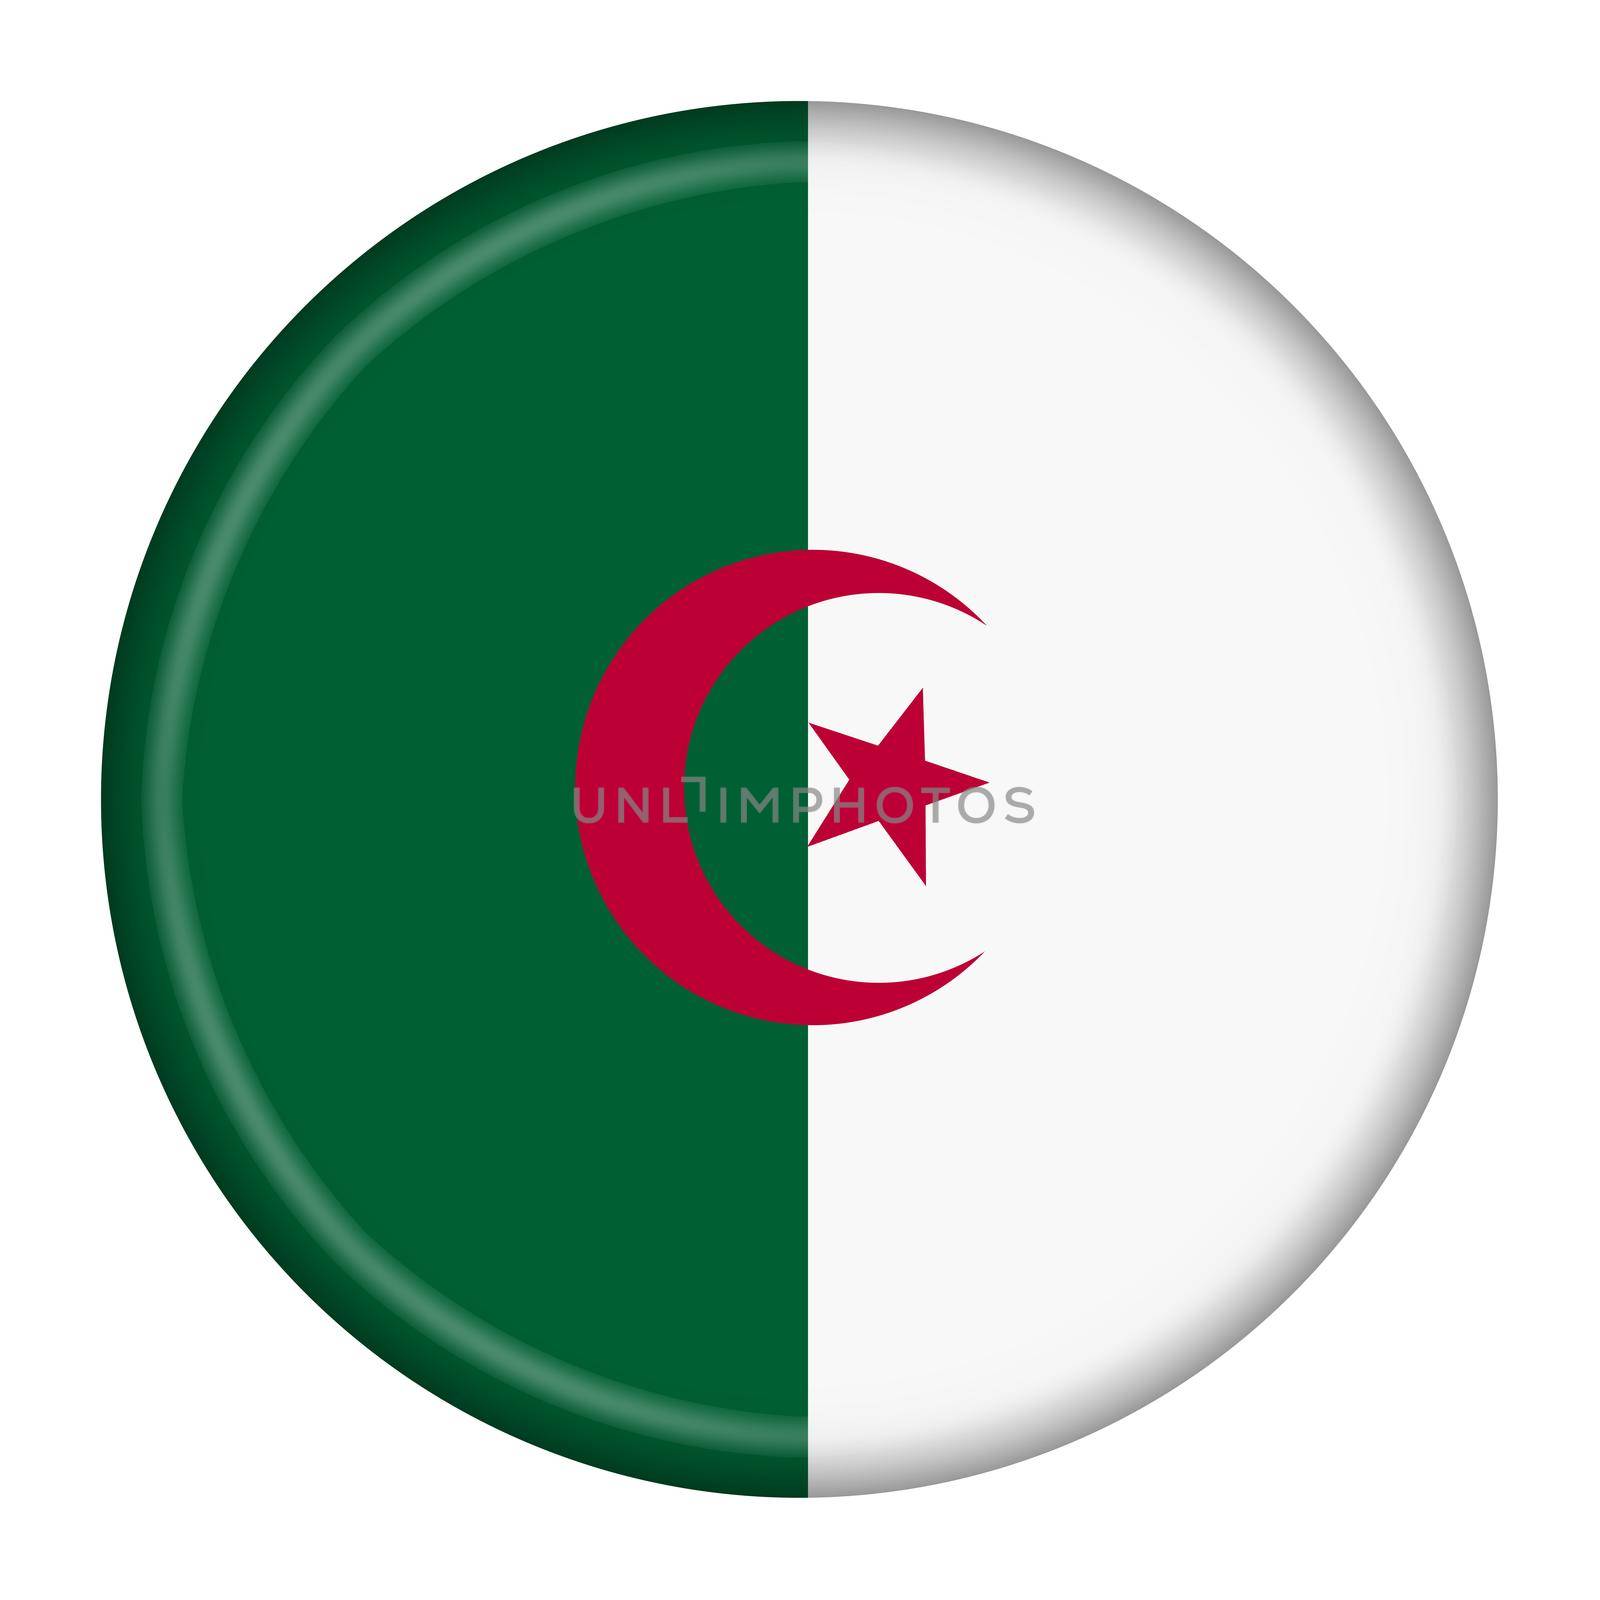 An Algeria flag button 3d illustration with clipping path